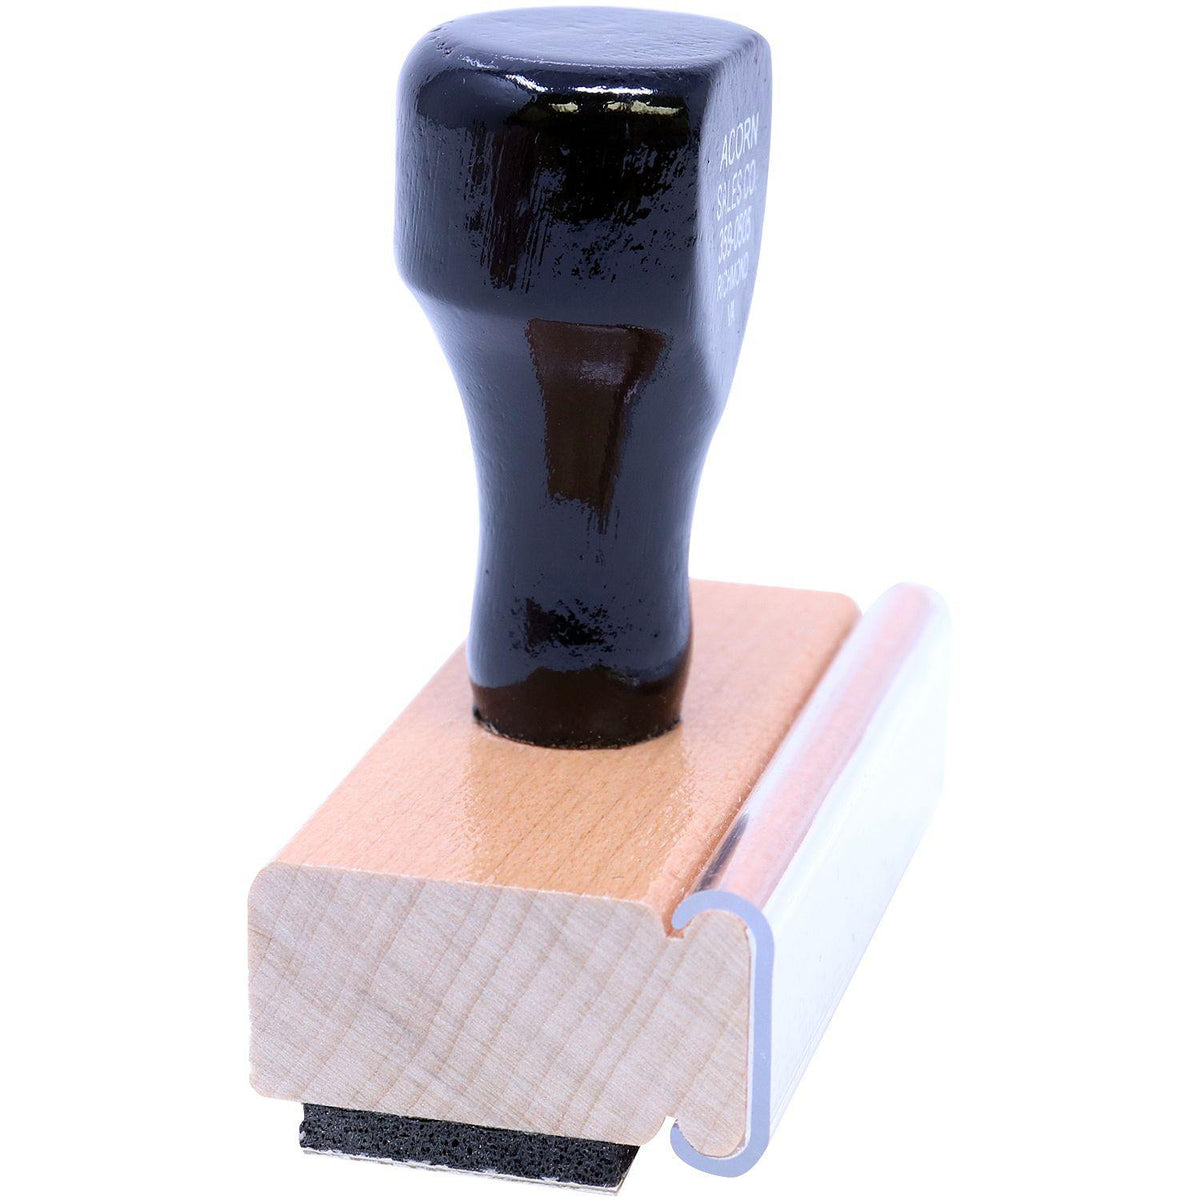 Side View of Large Correct And Hand Back To Teacher Rubber Stamp at an Angle